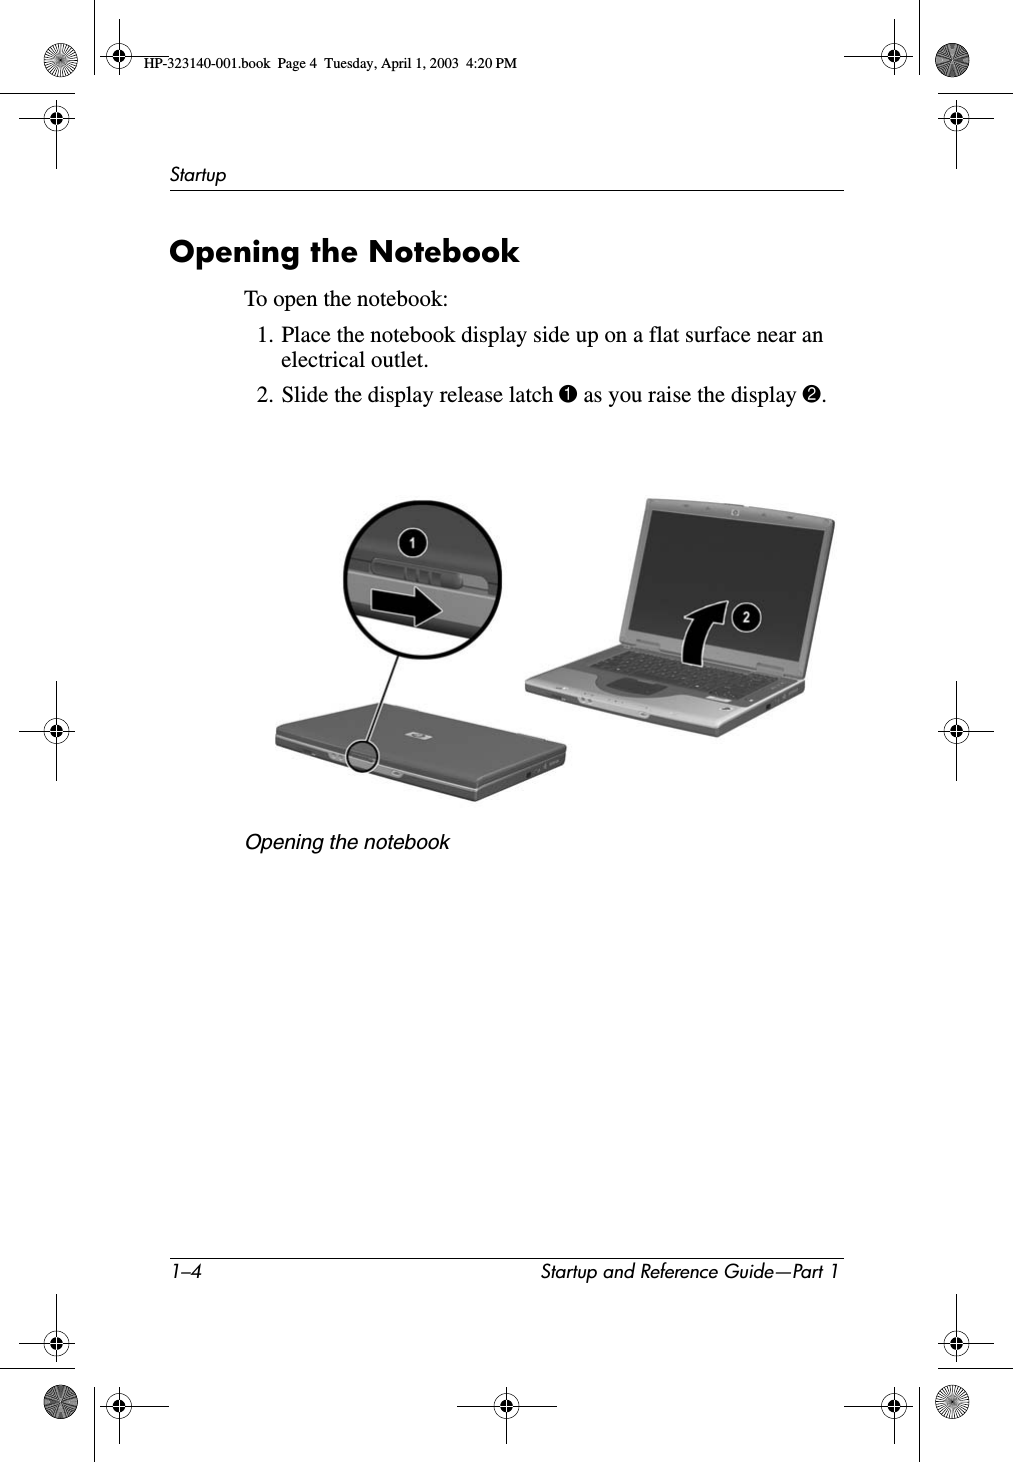 1–4 Startup and Reference Guide—Part 1StartupOpening the NotebookTo open the notebook:1. Place the notebook display side up on a flat surface near an electrical outlet.2. Slide the display release latch 1 as you raise the display 2.Opening the notebookHP-323140-001.book  Page 4  Tuesday, April 1, 2003  4:20 PM